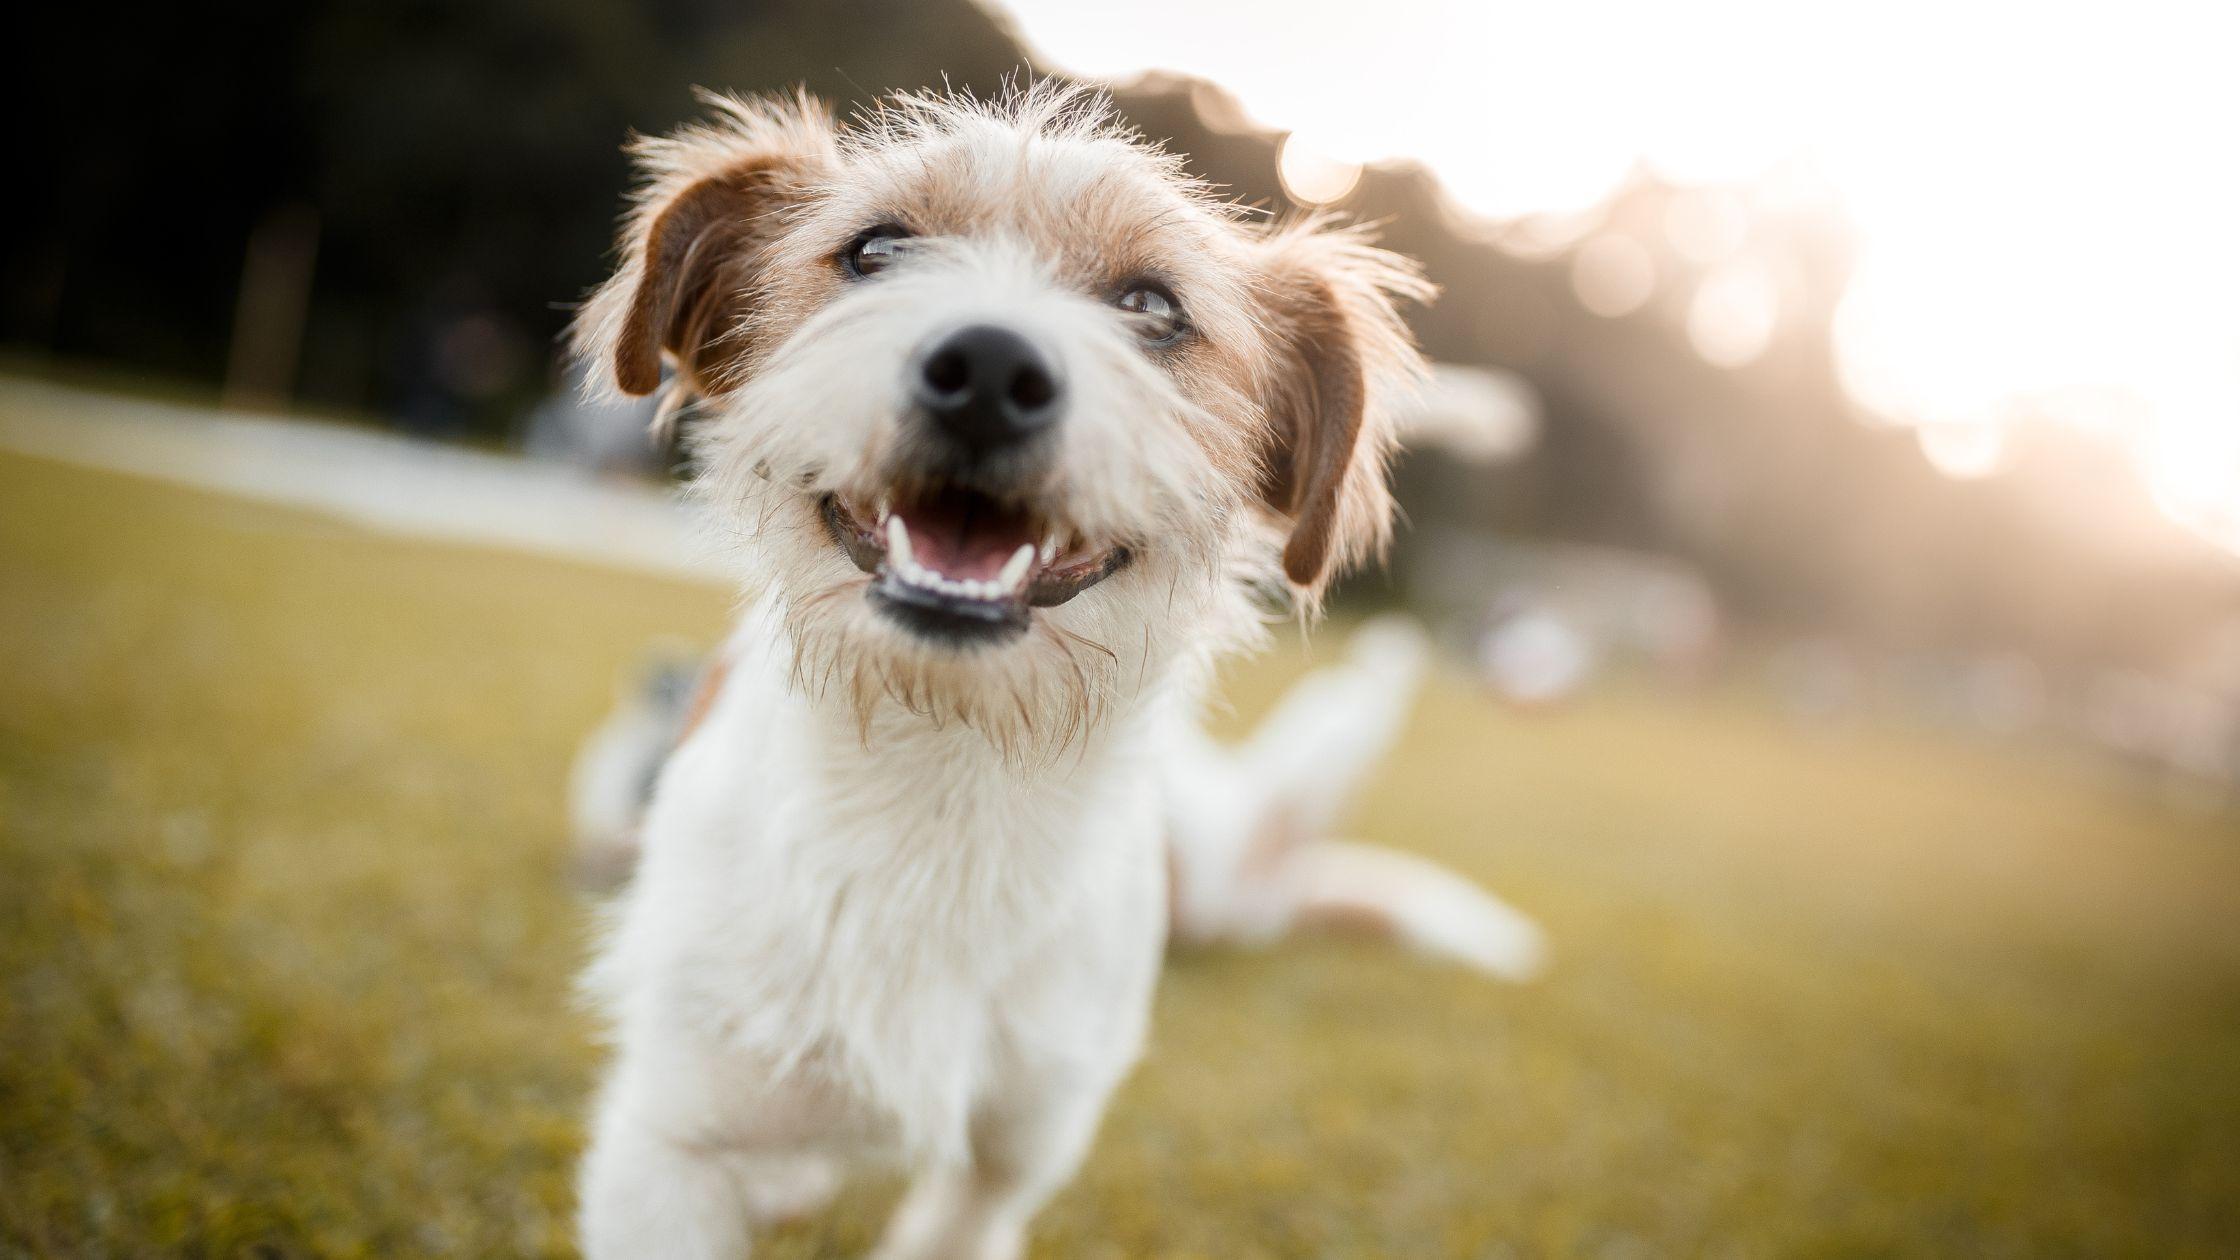 Dog smiling to camera in field 